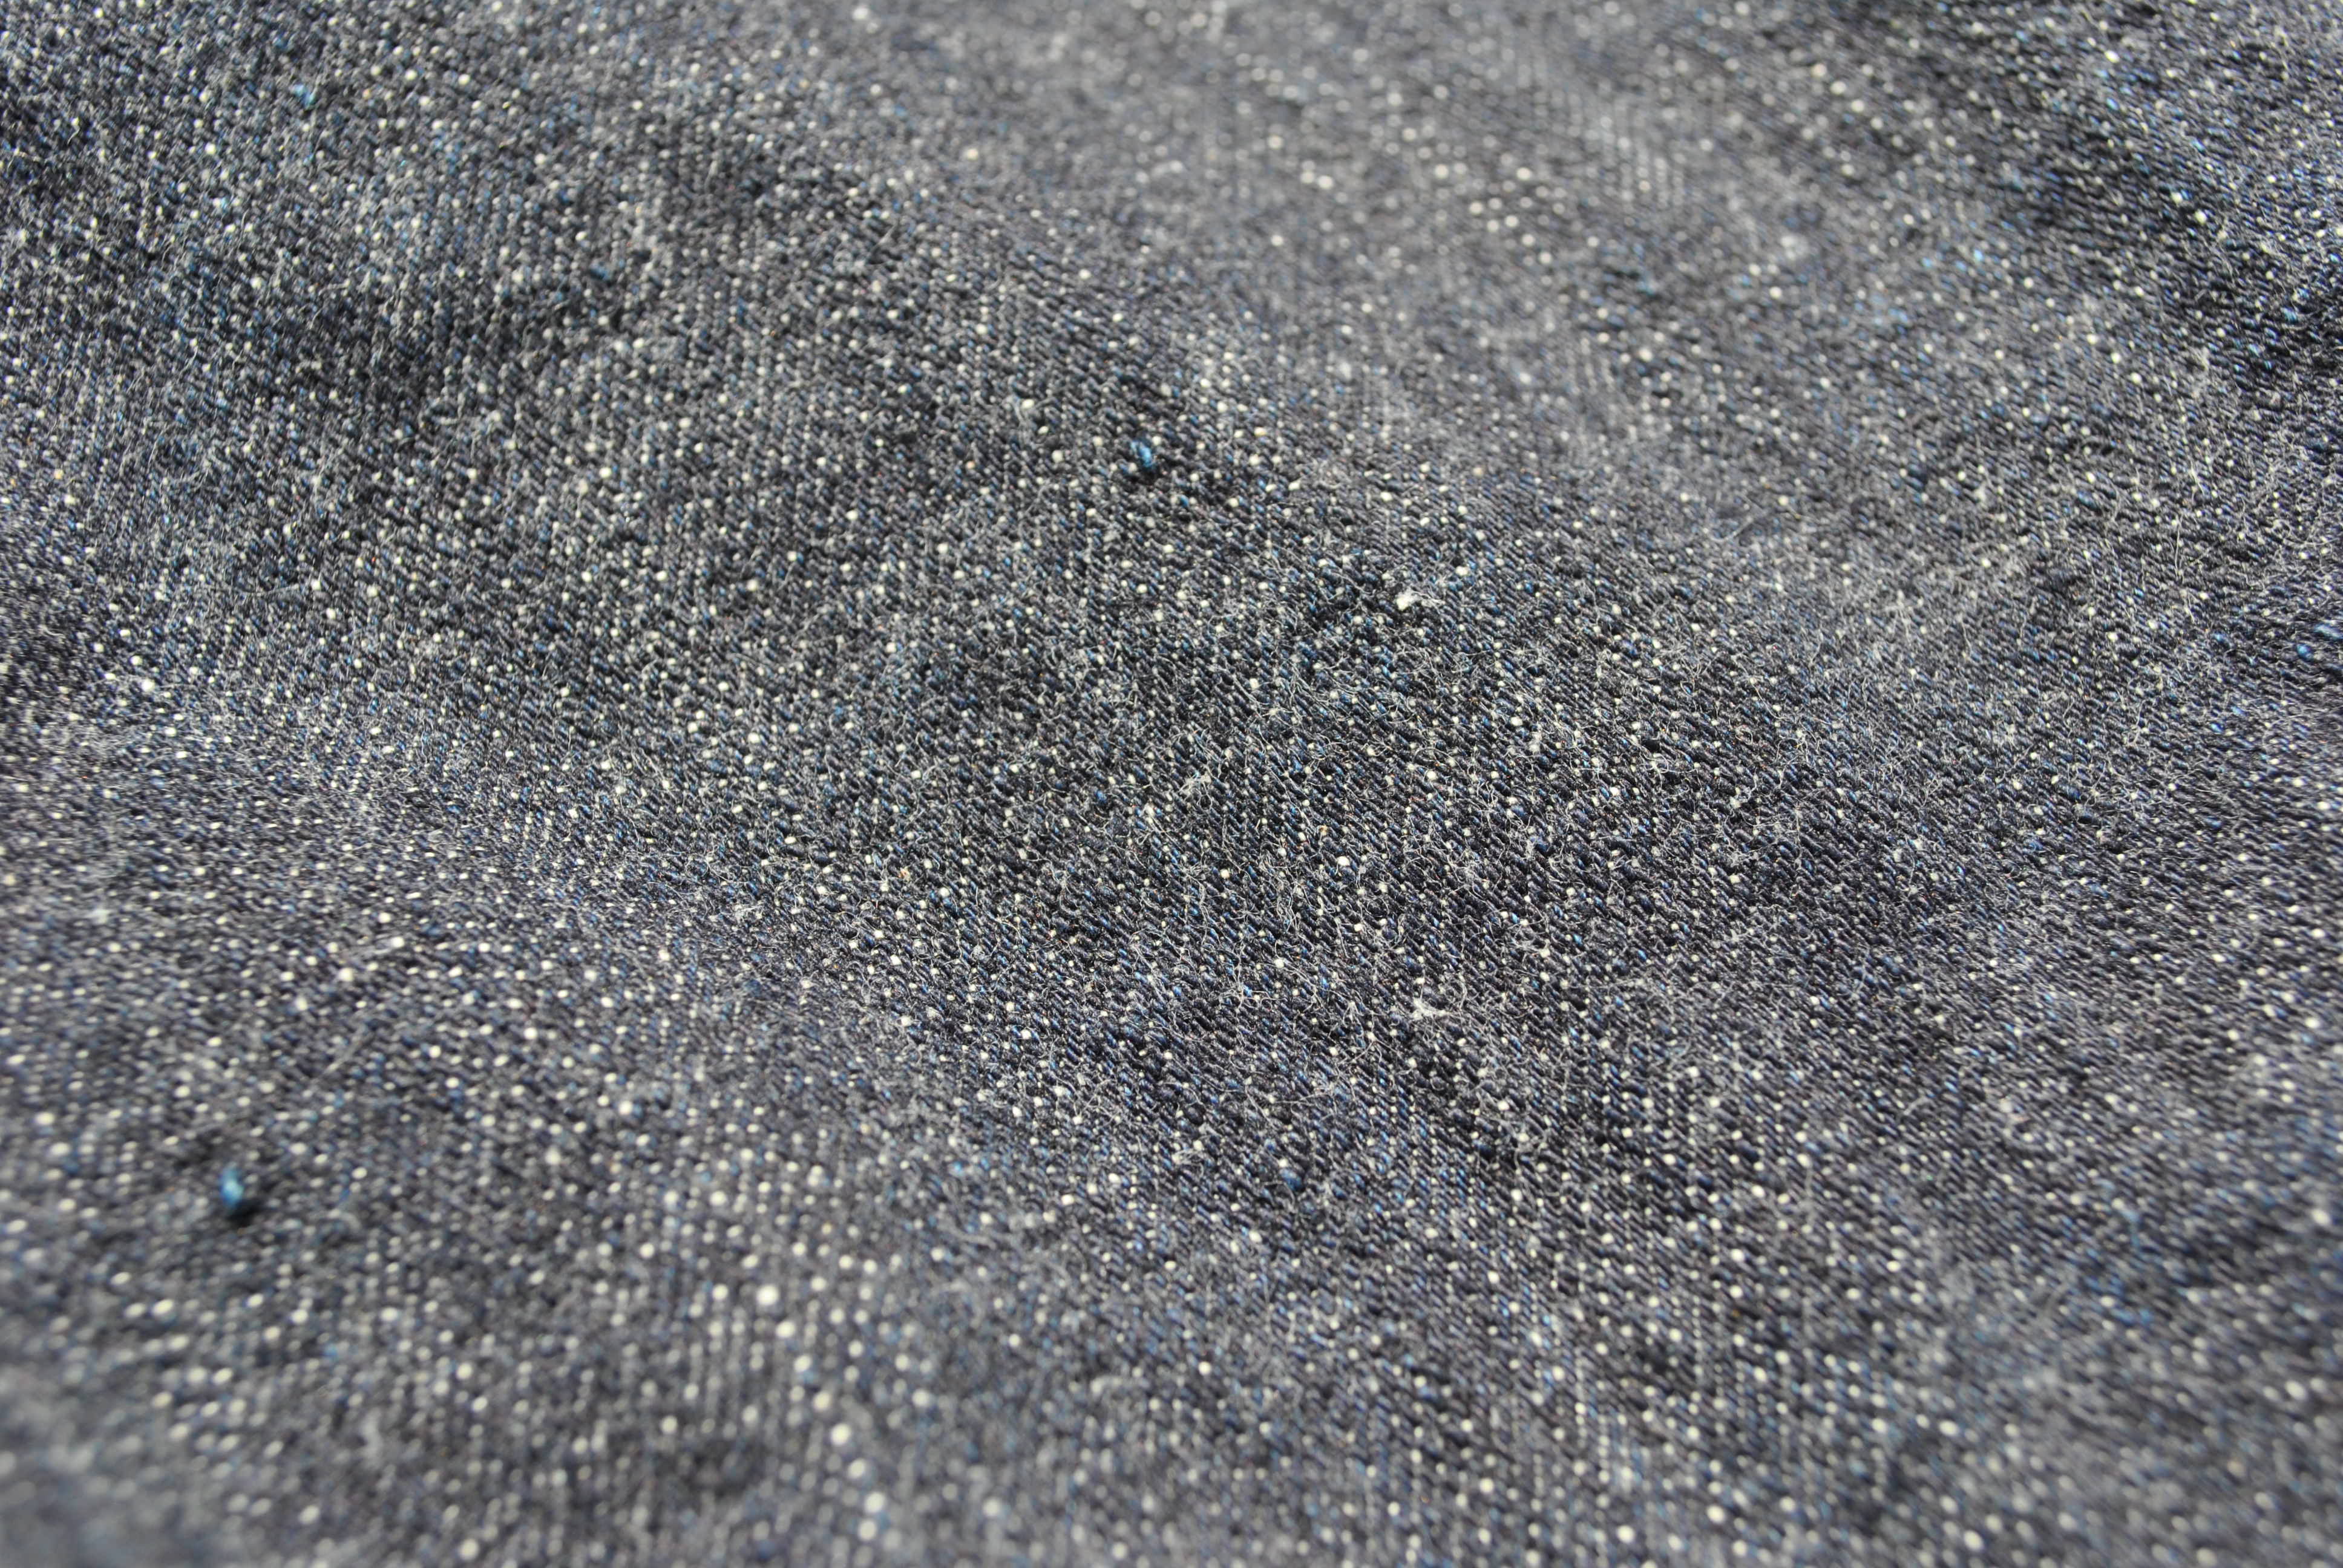 PRODUCTION OF DENIM FABRIC BY THE USE OF - ppt download